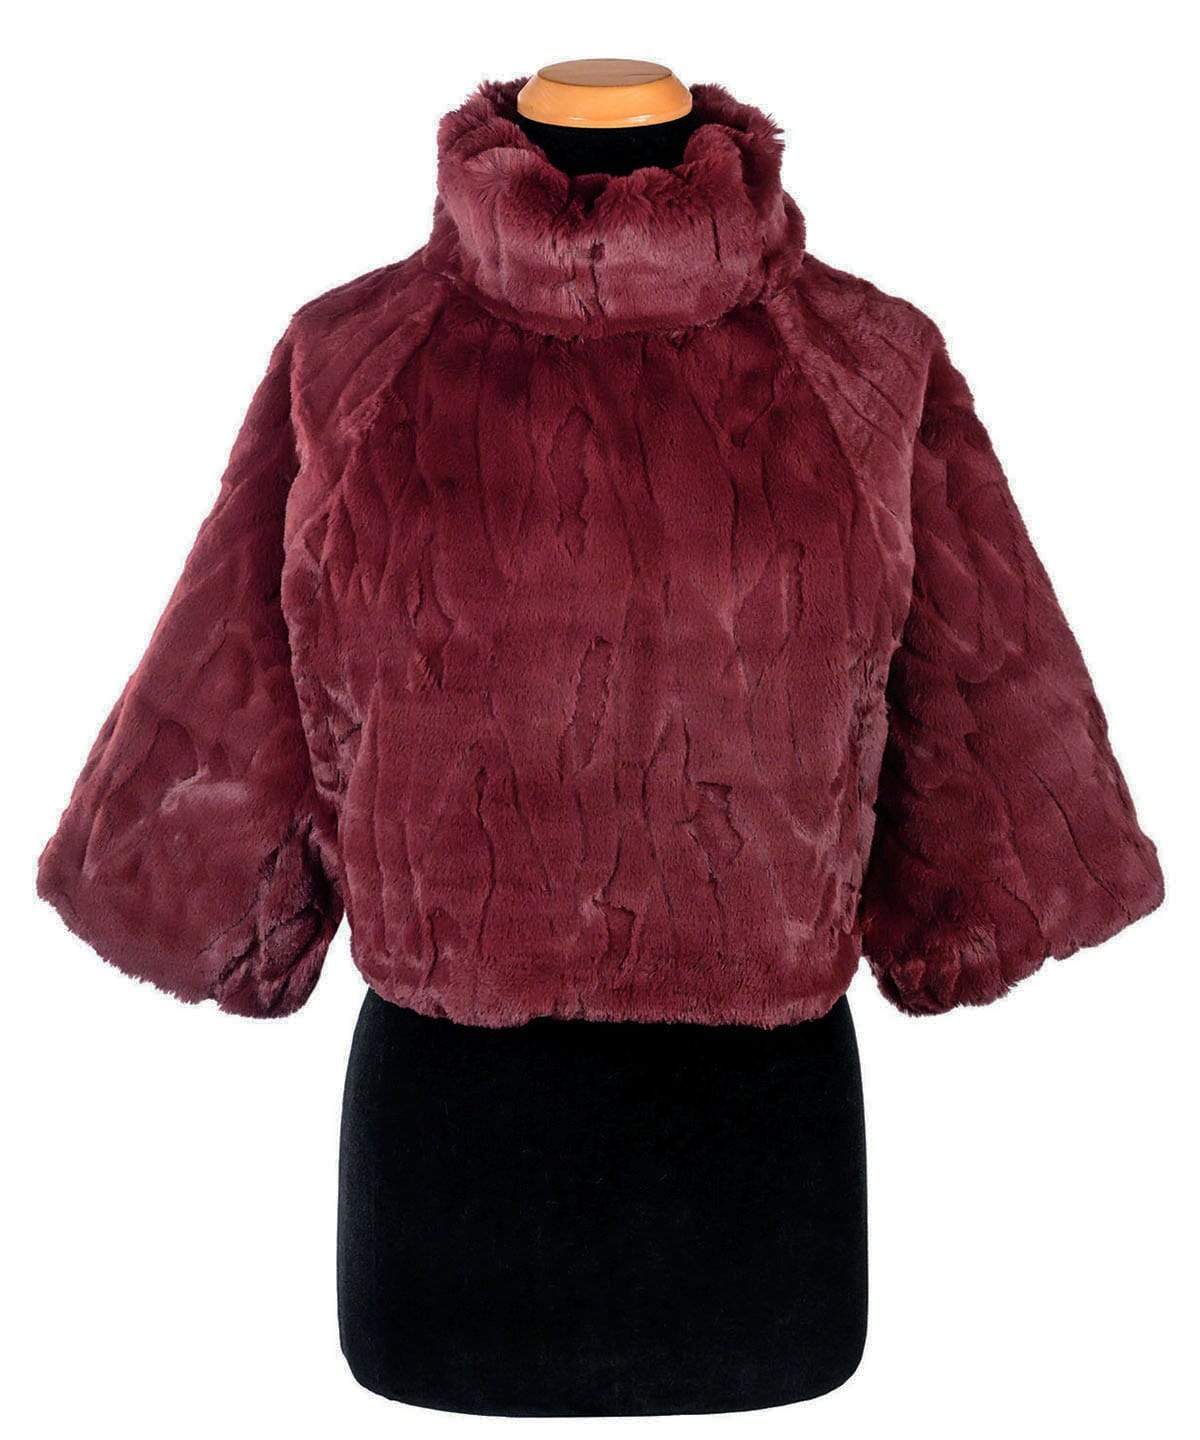 Sweater Top - Luxury Faux Fur in Cranberry Creek  (Sold Out!)